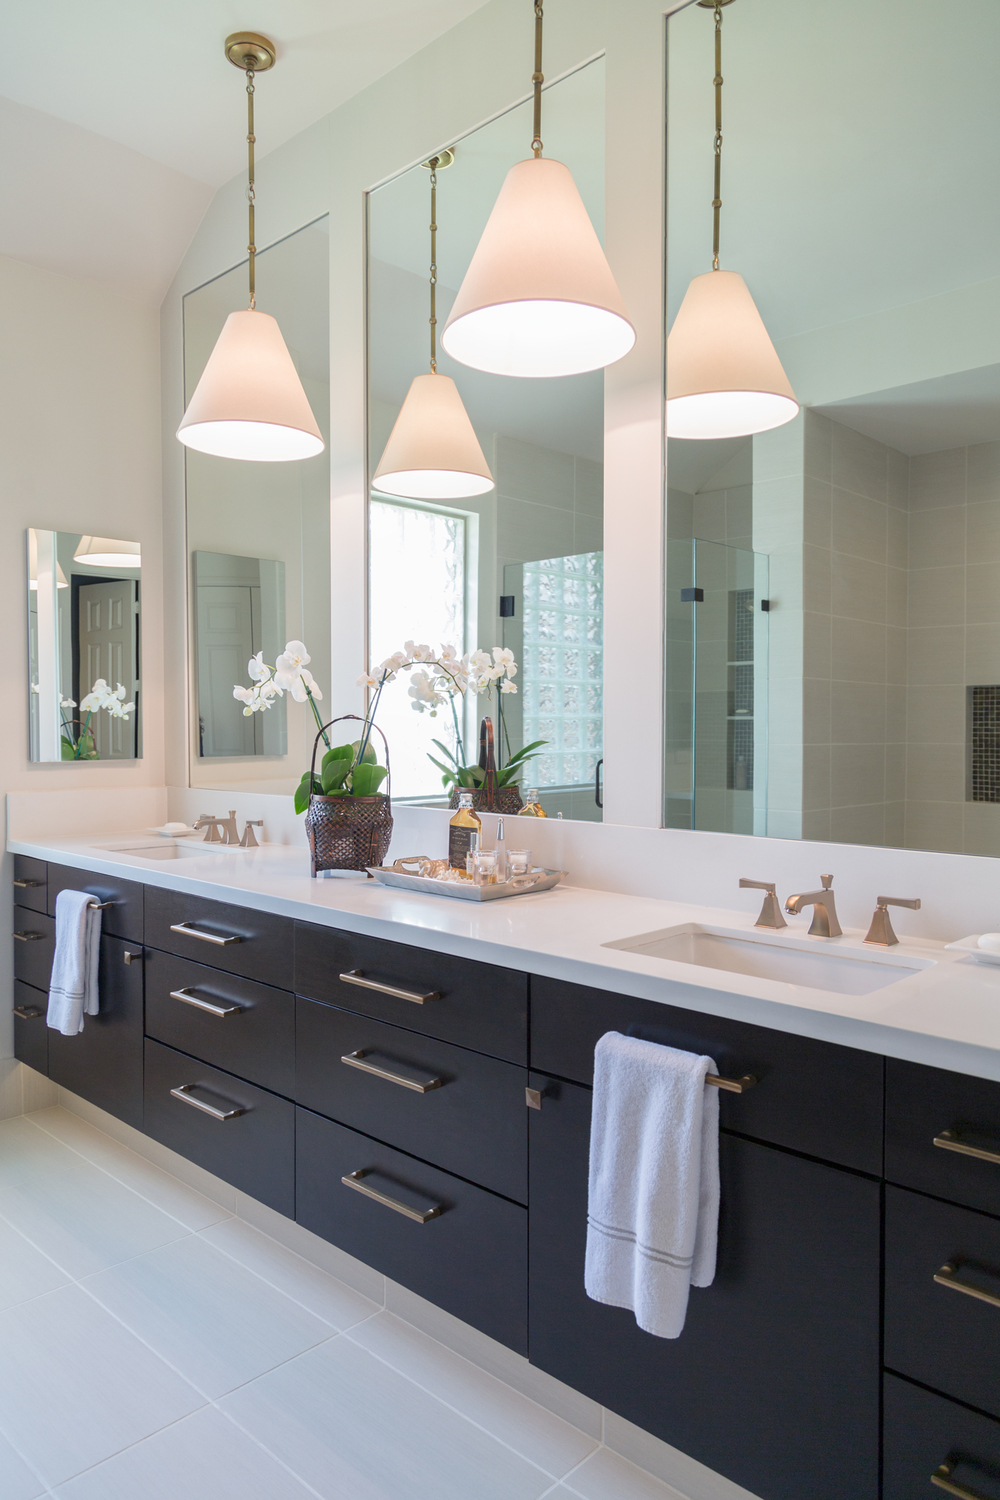 A Beautiful Alternative For Lighting In, Pictures Of Pendant Lights Over Bathroom Vanity